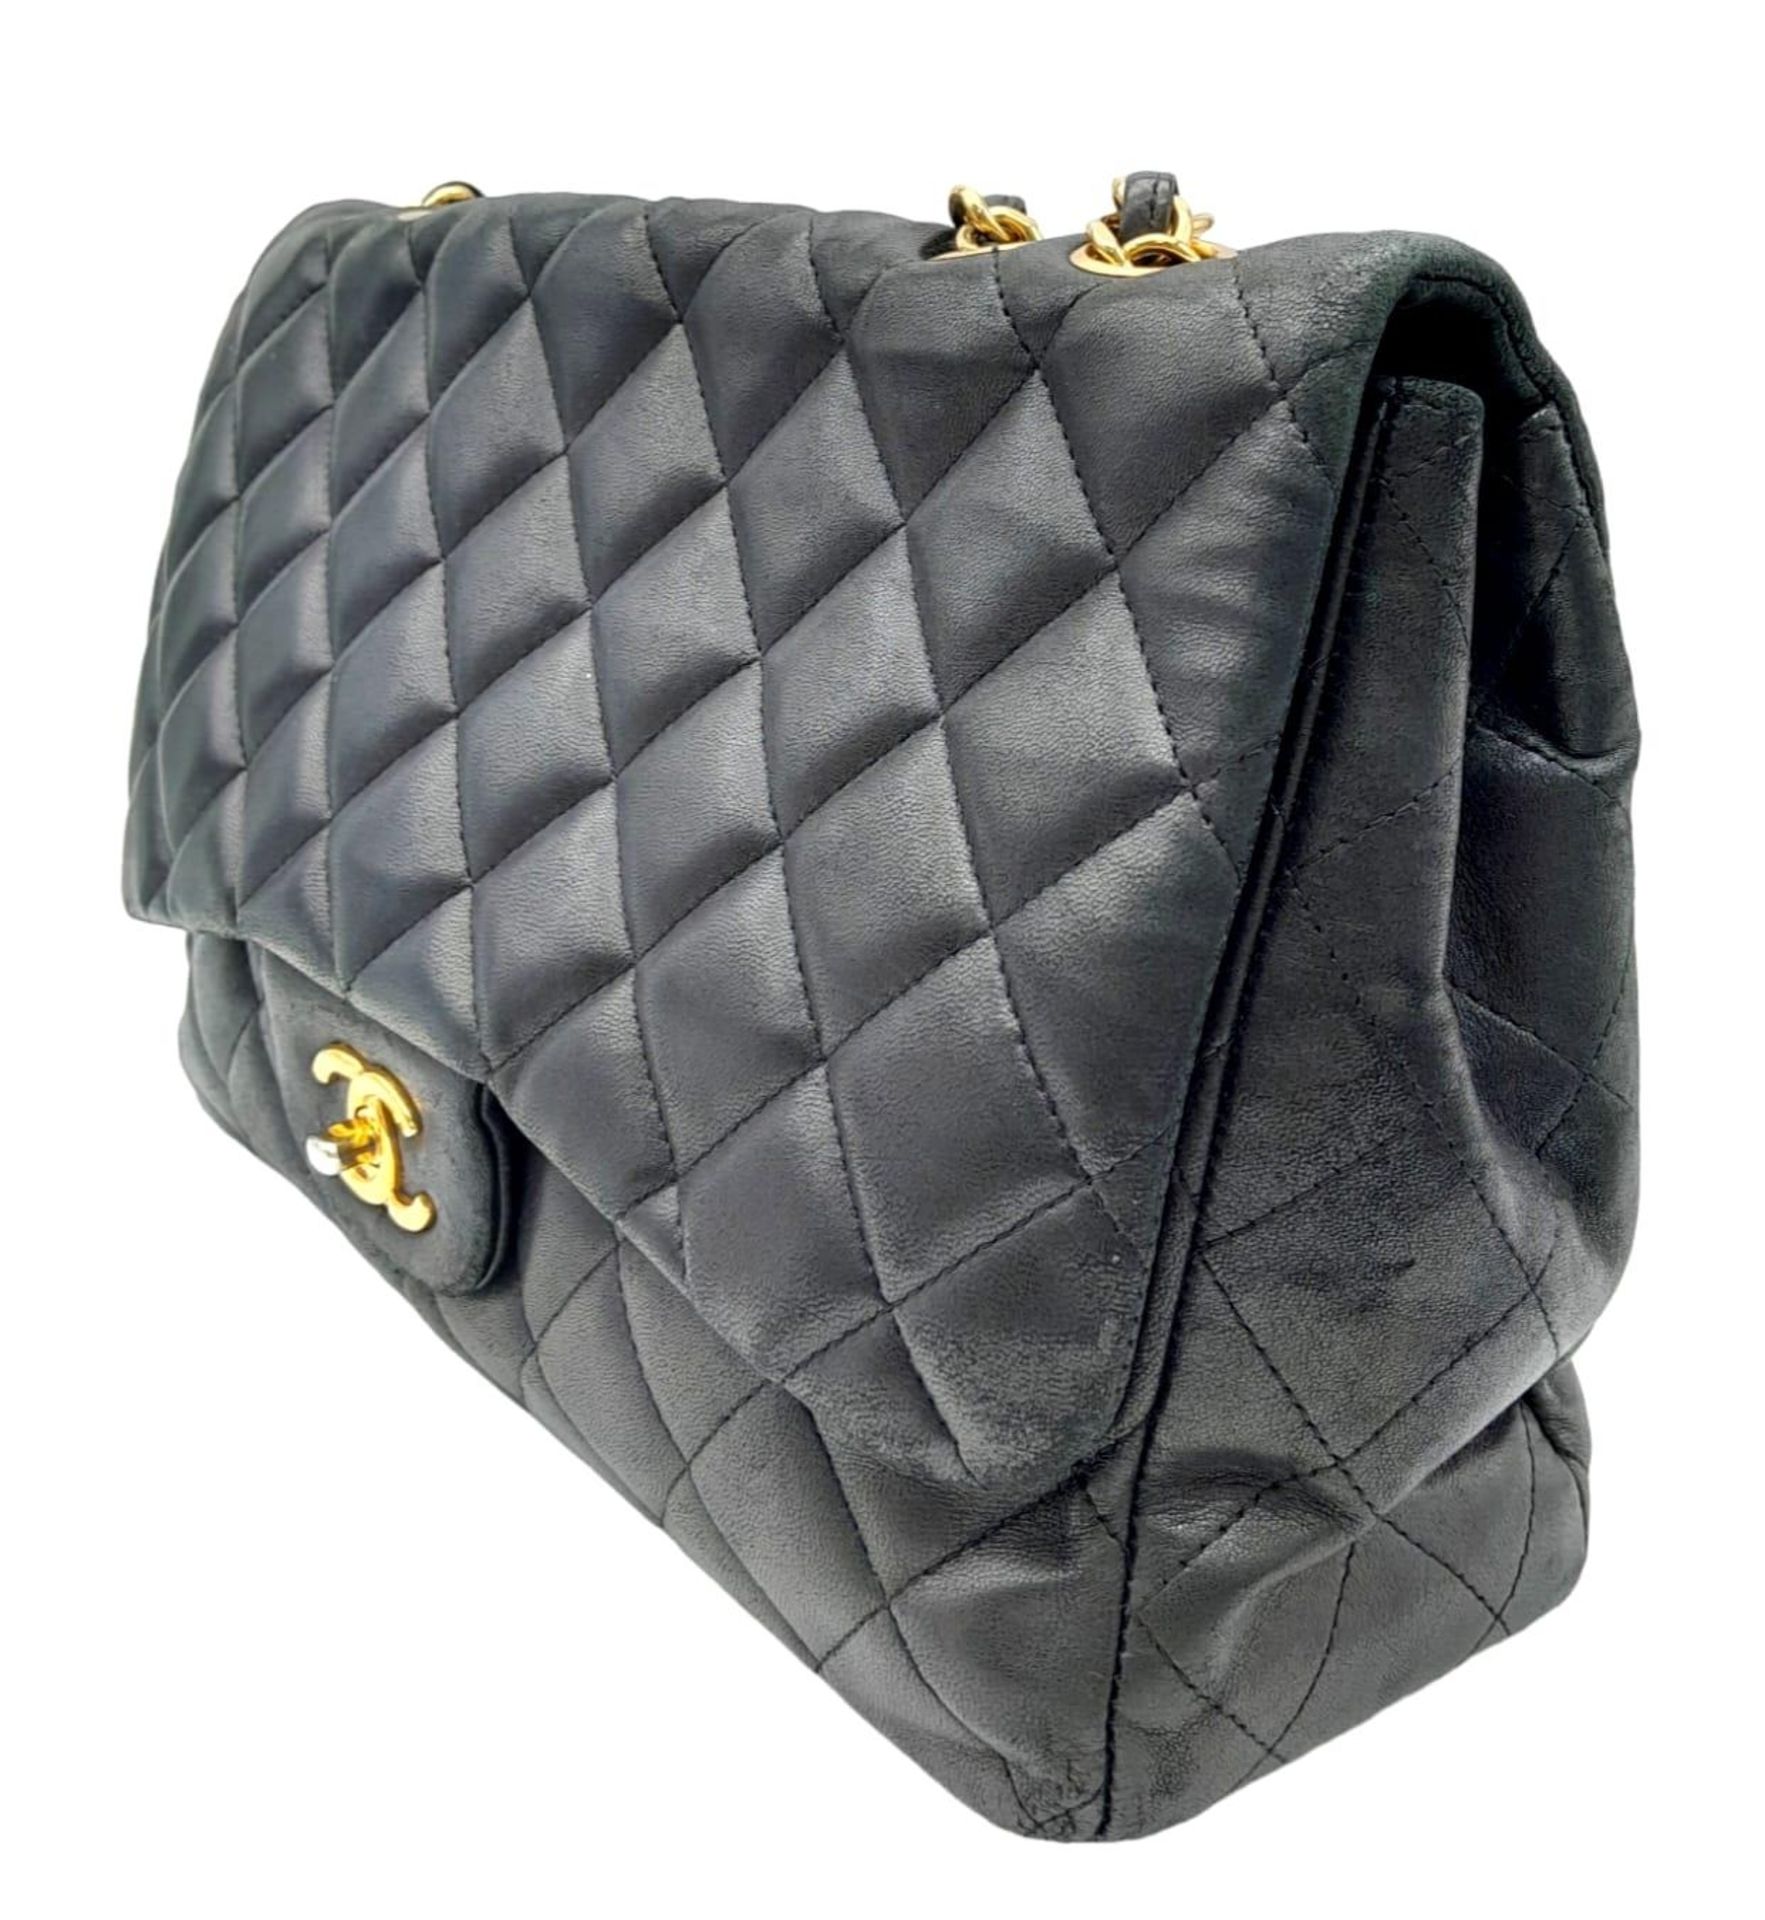 A Chanel Black Caviar Classic Single Flap Bag. Quilted pebbled leather exterior with gold-toned - Bild 4 aus 19